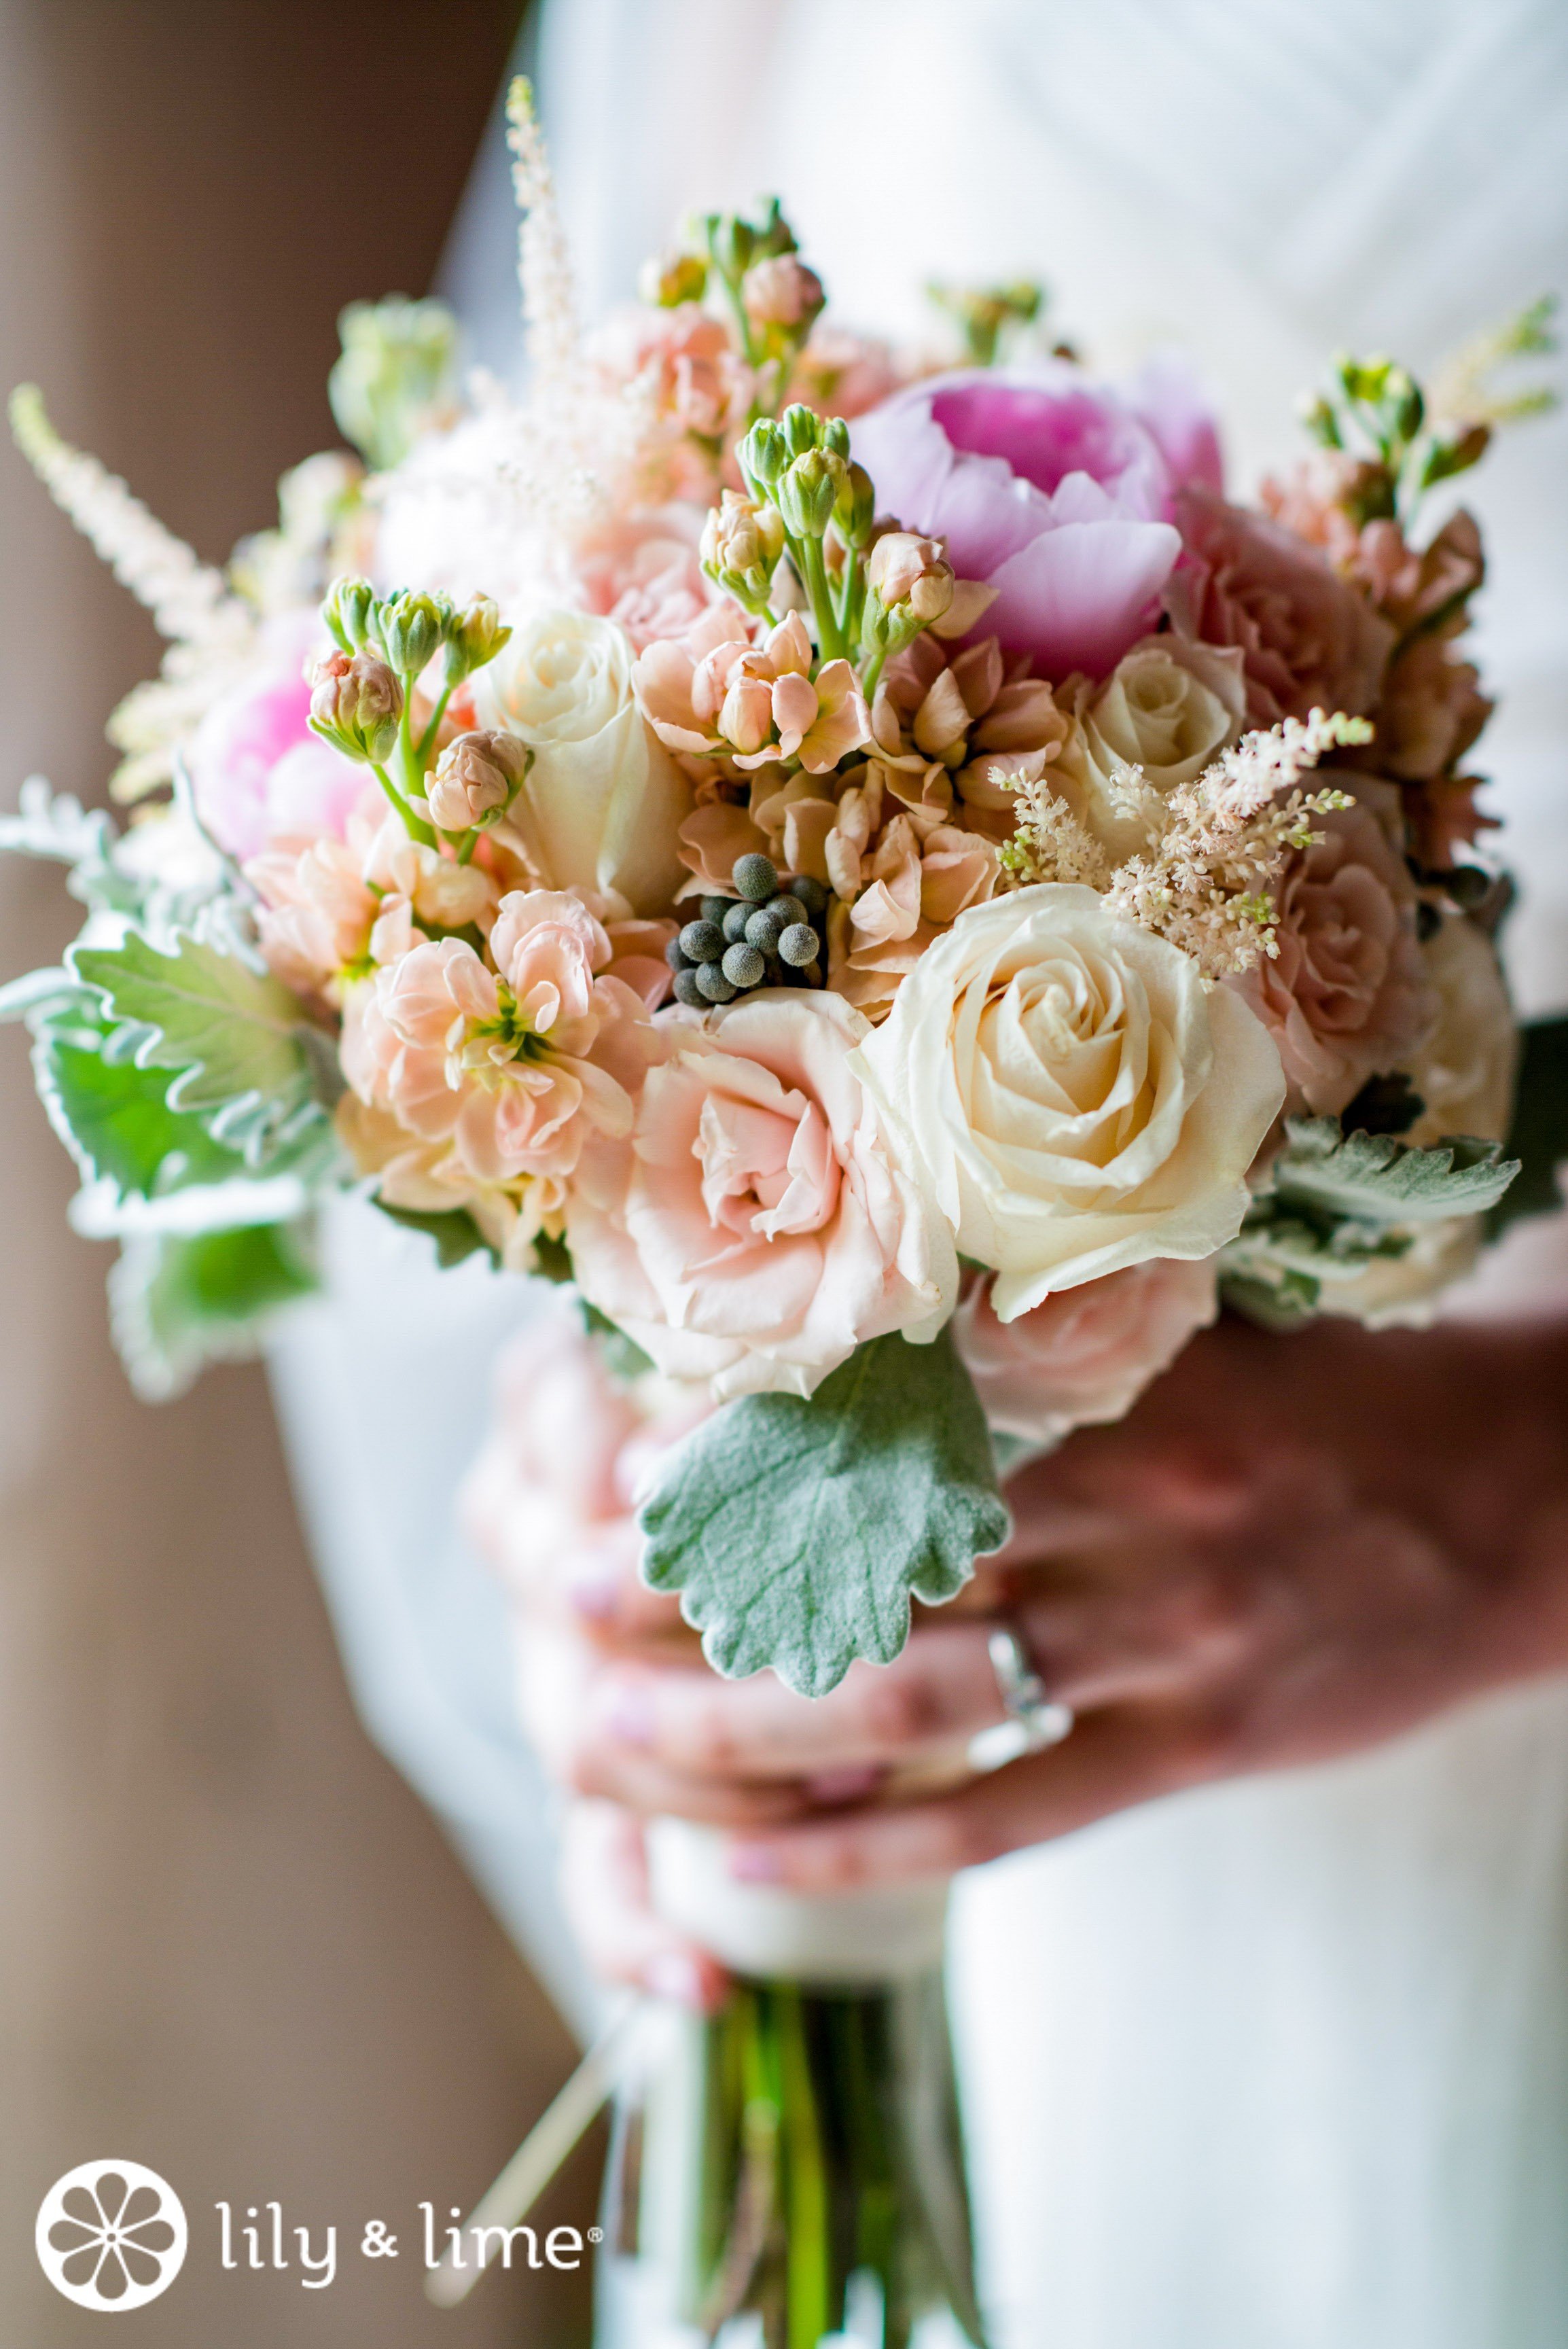 Mini-Bouquets for the Understated and Minimal Bride